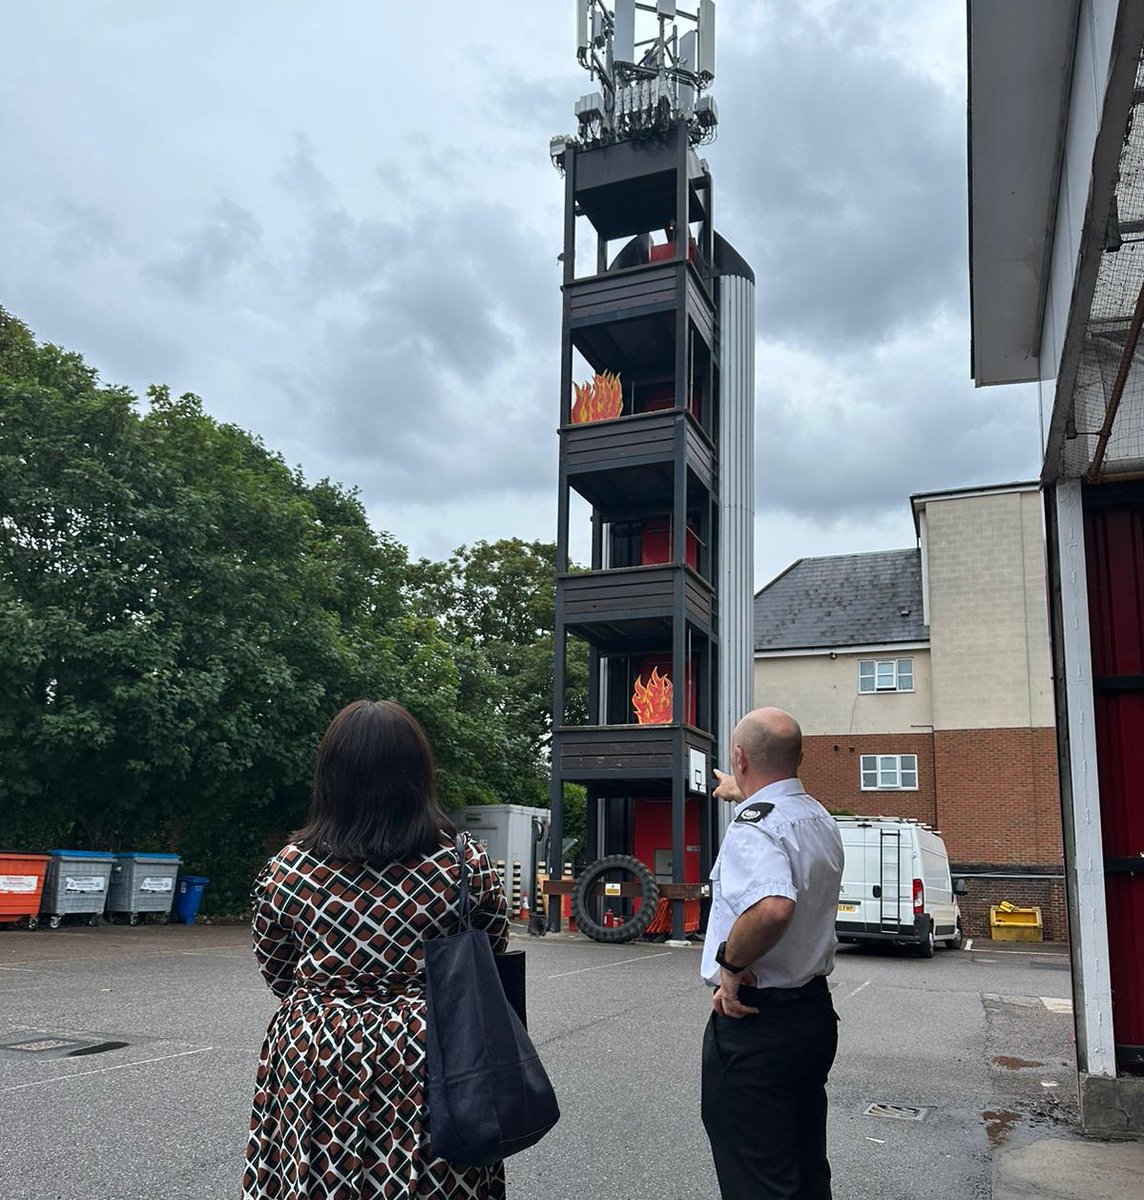 Last month I visited Erith Fire Station to discuss the great work the local team are doing to raise awareness of fire safety. We discussed the increasingly common causes of fire, including the usage of unofficial e-bike & e-scooter chargers. @LondonFire